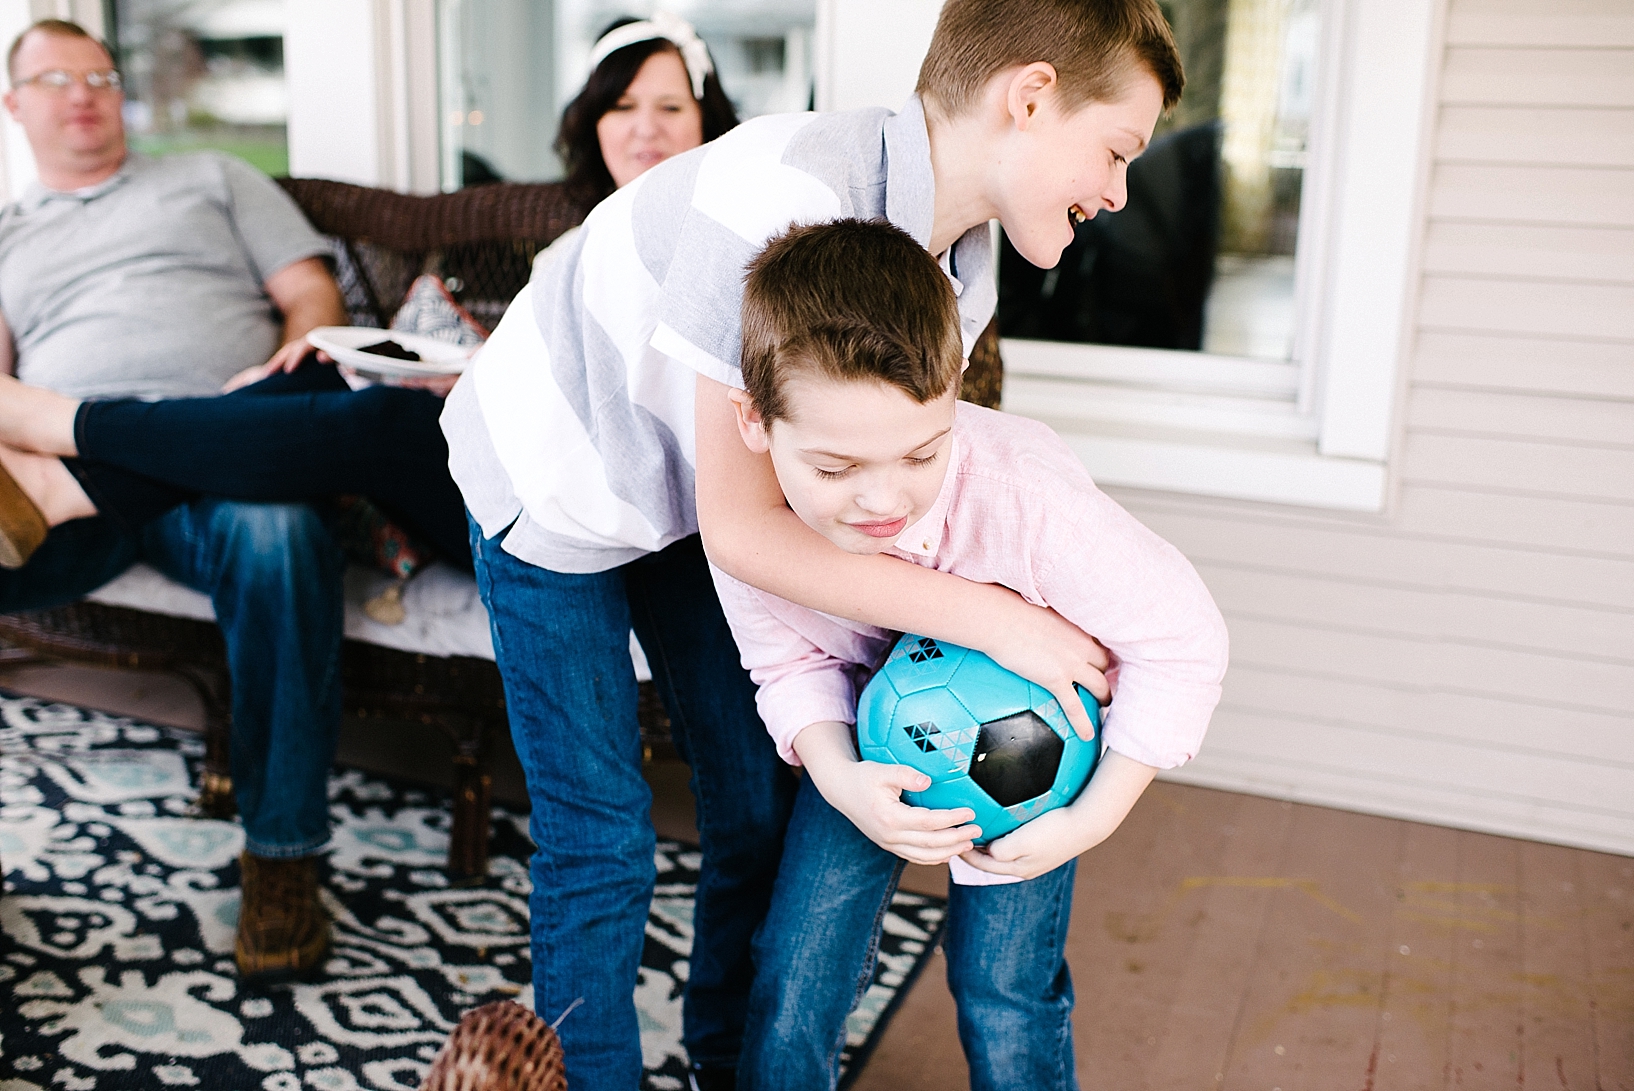 brothers wrestling on front porch over teal soccer ball